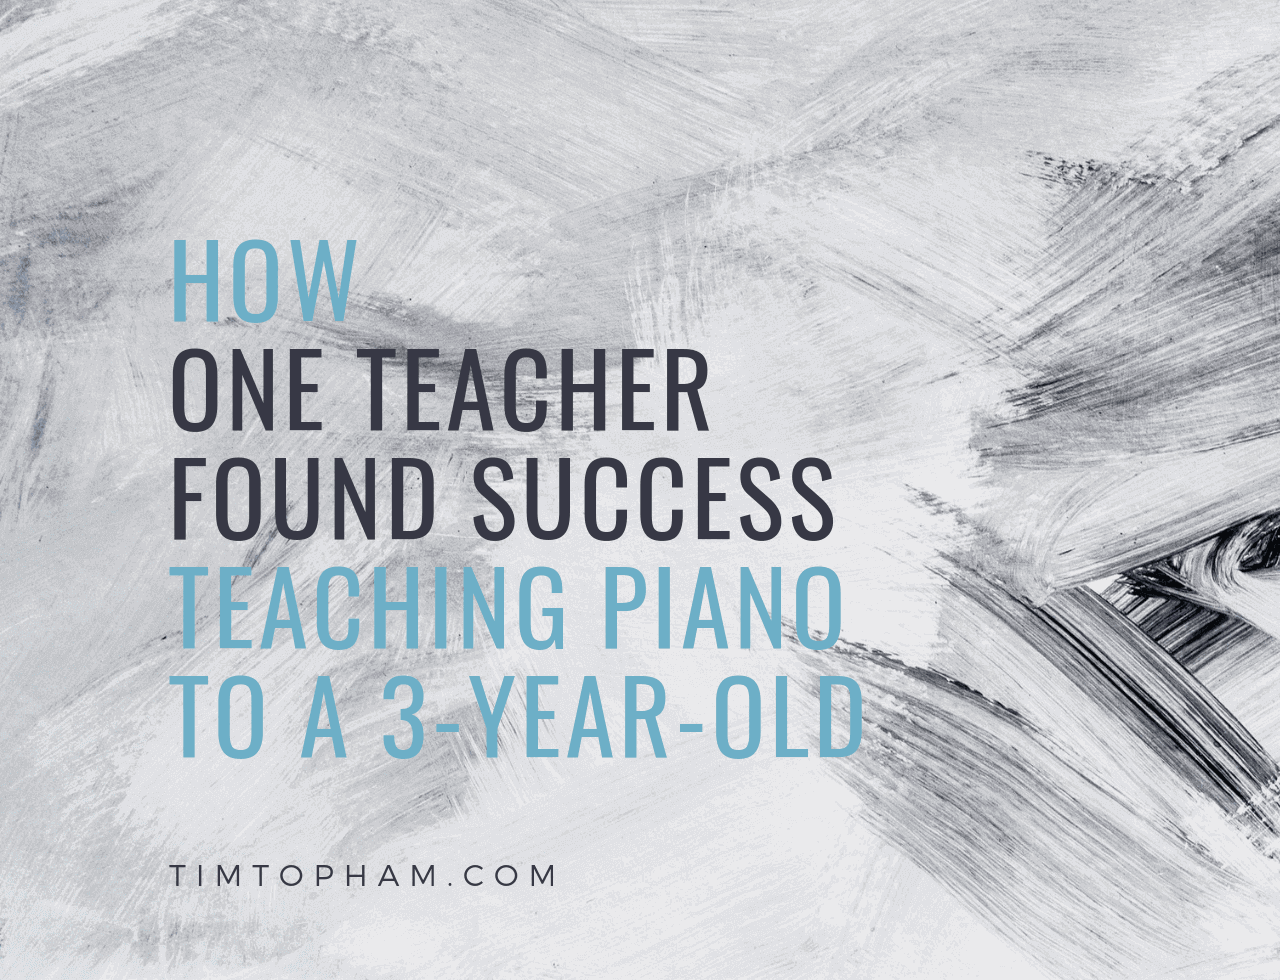 How-One-Teacher-Found-Success-Teaching-Piano-to-a-3-Year-Old